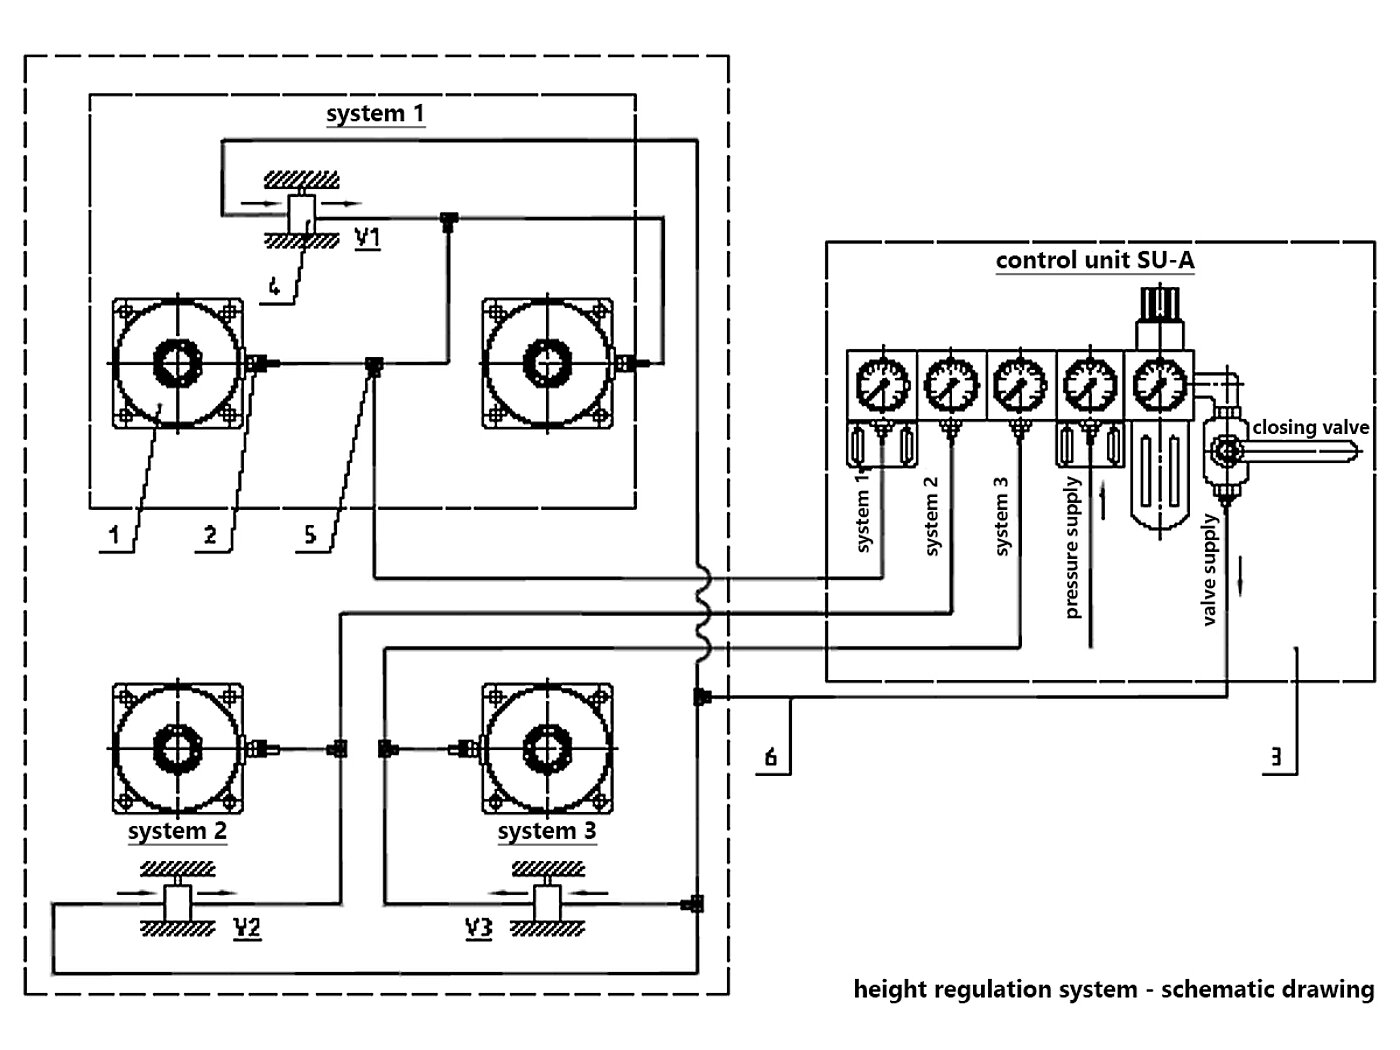 a black-and-white schematic drawing for the systemic lay-out and function of the optional level regulation for the vibration-isolating air-cushion elements FLN, with central control unit and connected vibration isolators